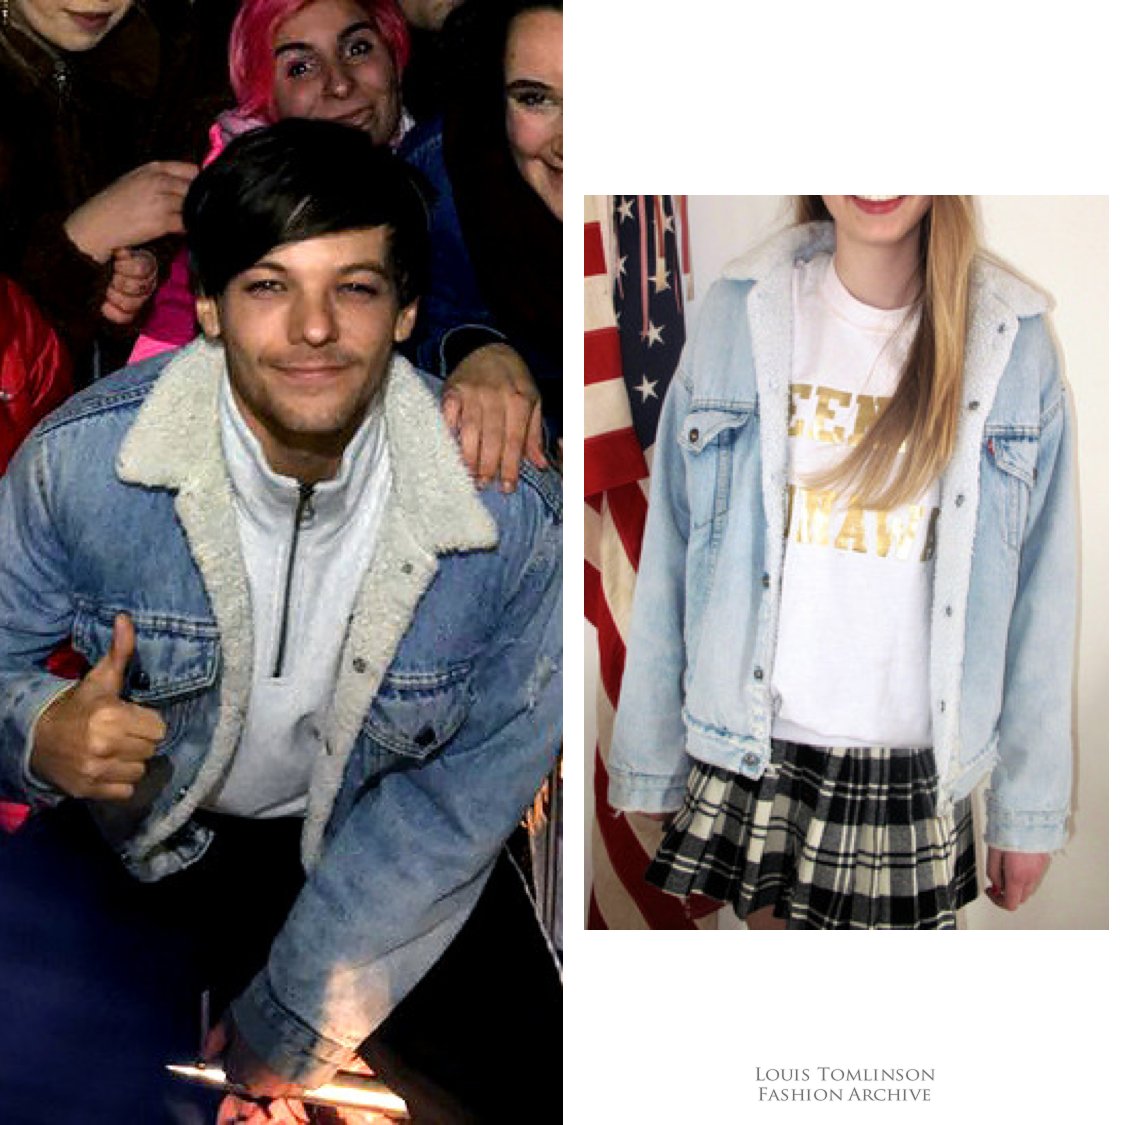 Louis Tomlinson Fashion Archive on X: 11/25/18  Louis wore a Levi's  shearling lined denim jacket from London Loves LA (no longer available)  leaving #XFactor. He's had this jacket since 2013.